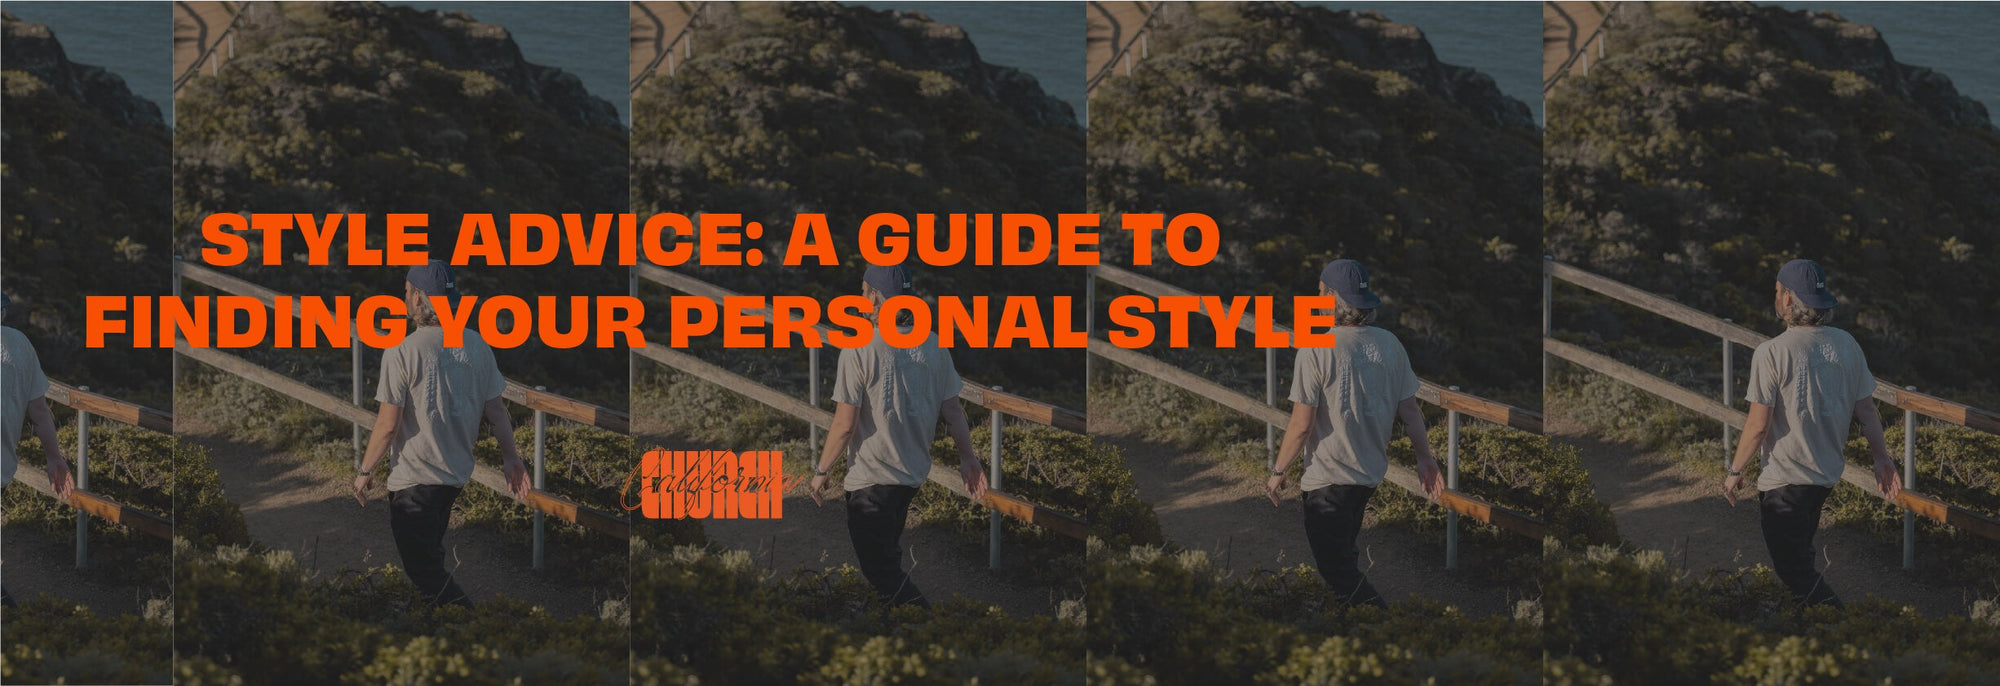 style advice - how to find your own style